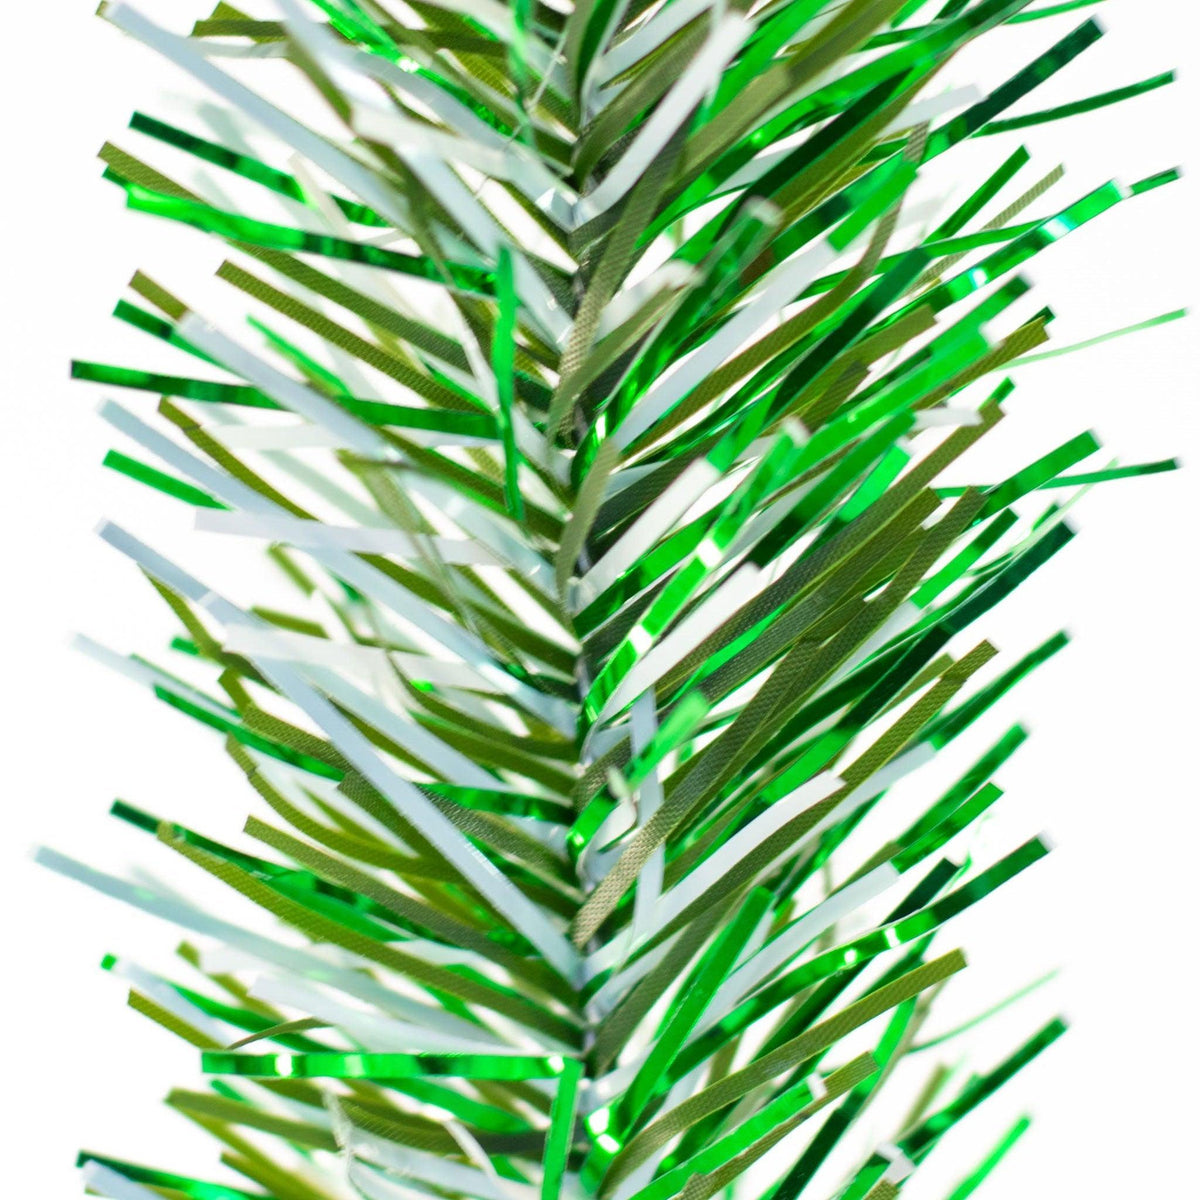 Lee Display's brand new 25ft Alpine Green and White Tinsel Garlands and Fringe Embellishments on sale at leedisplay.com